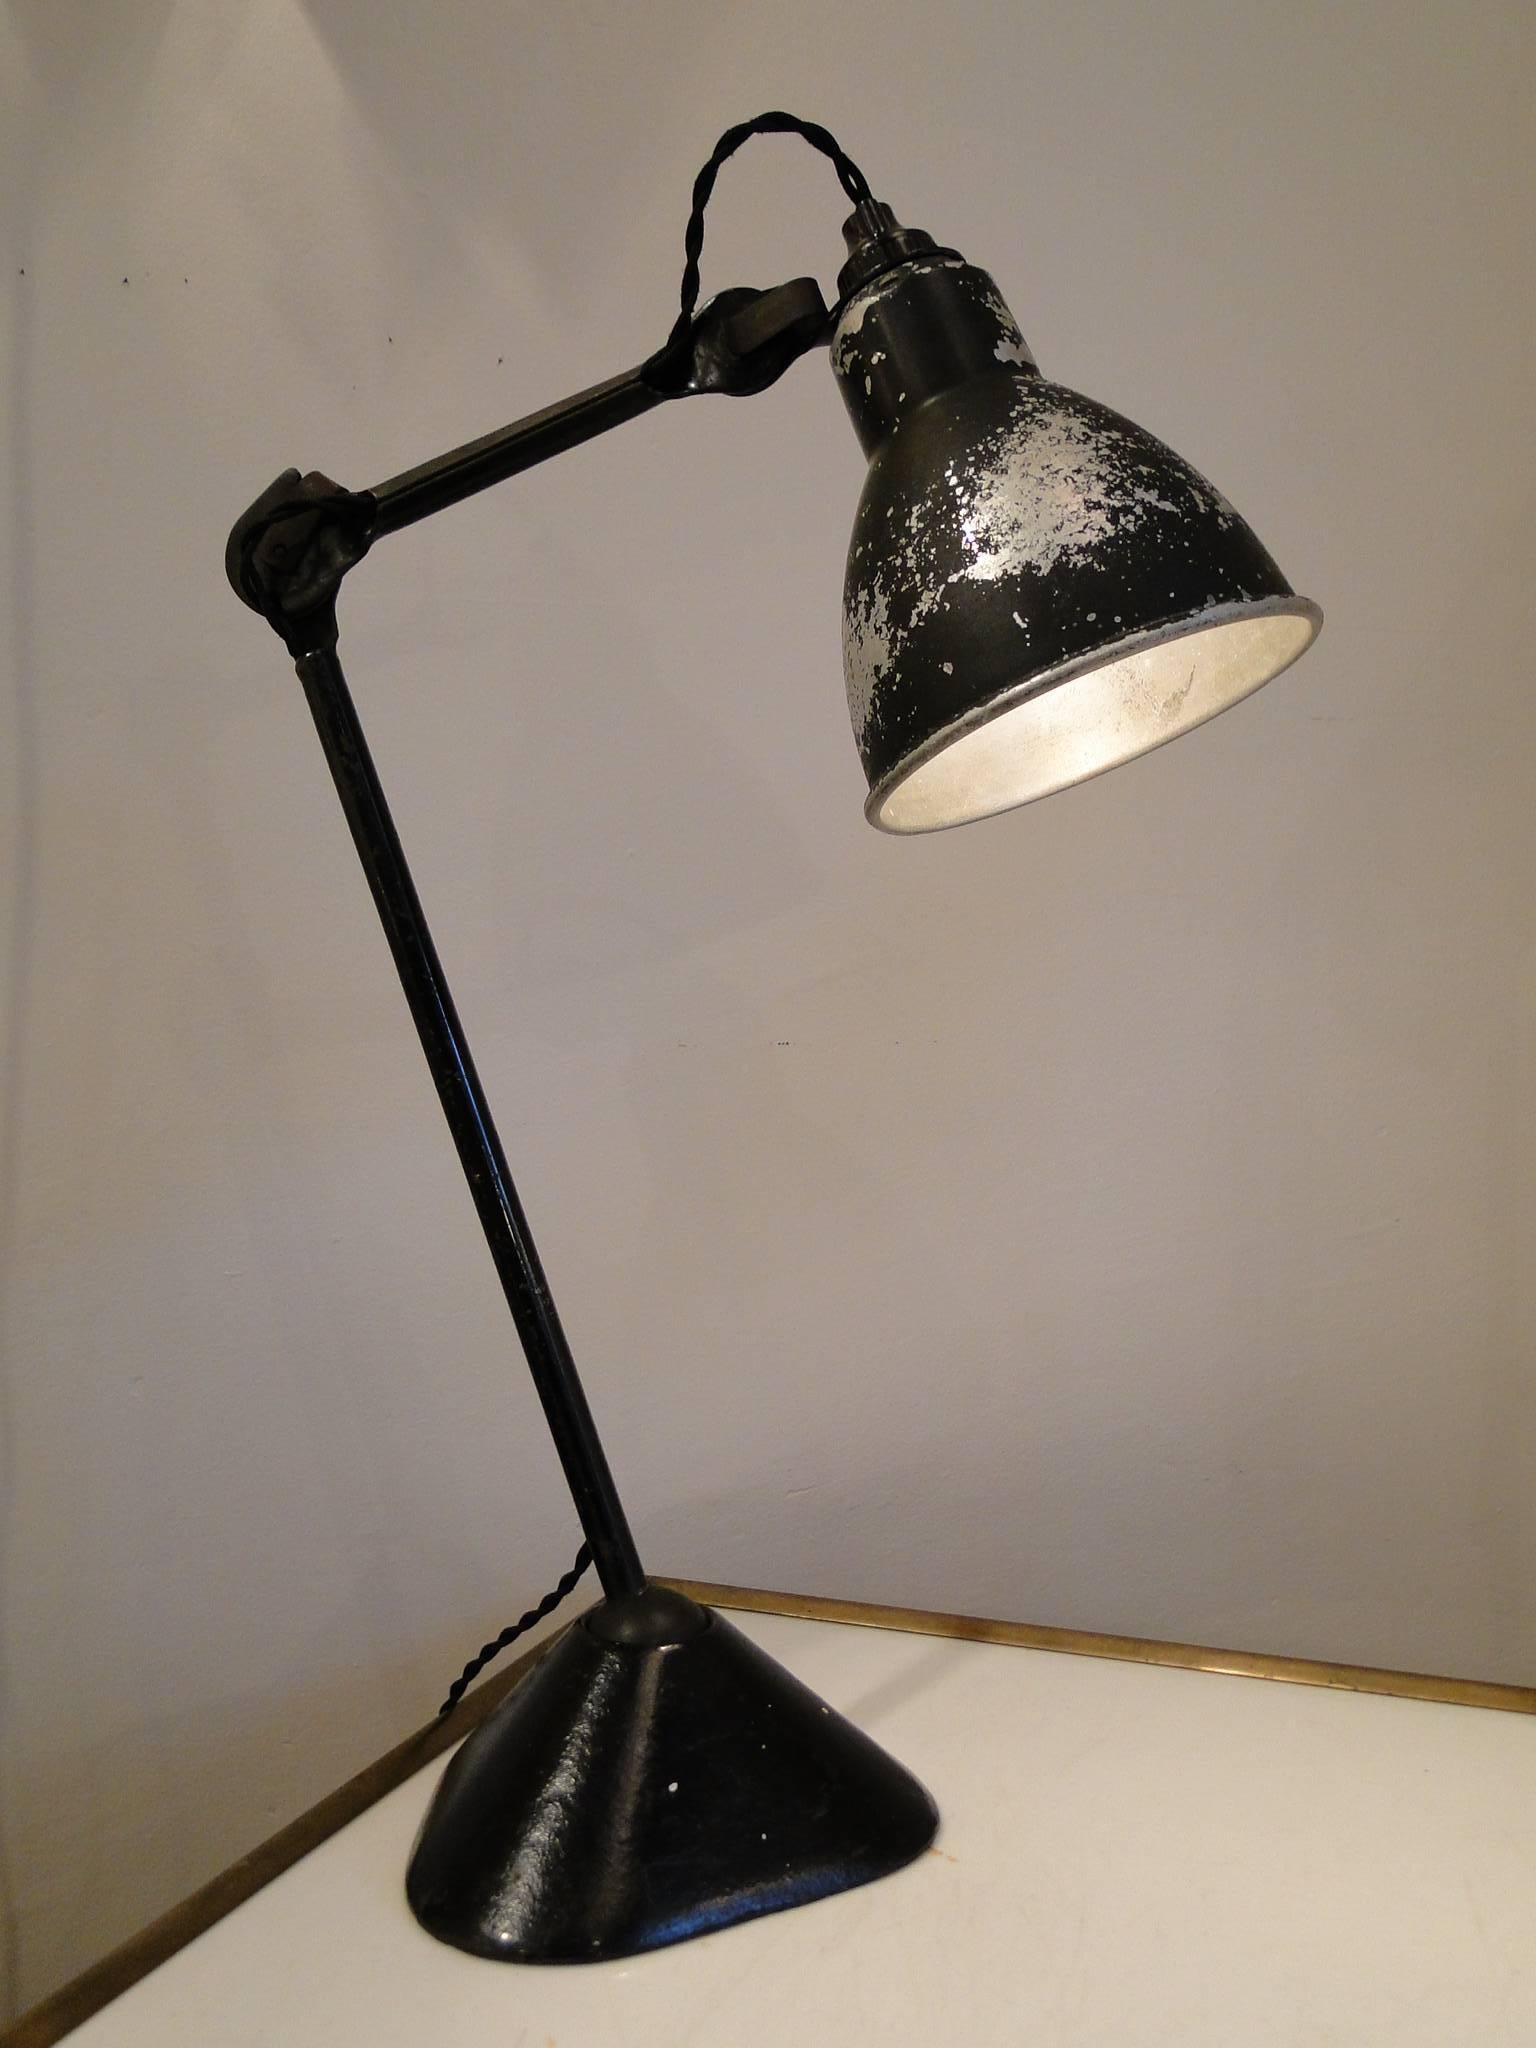 Table lamp designed by Bernard-Albin gras model 205 with aluminium shade model 1054. Marked Ravel Clamart. The Lampe Gras were selected by Le Corbusier in his studio and its projects.